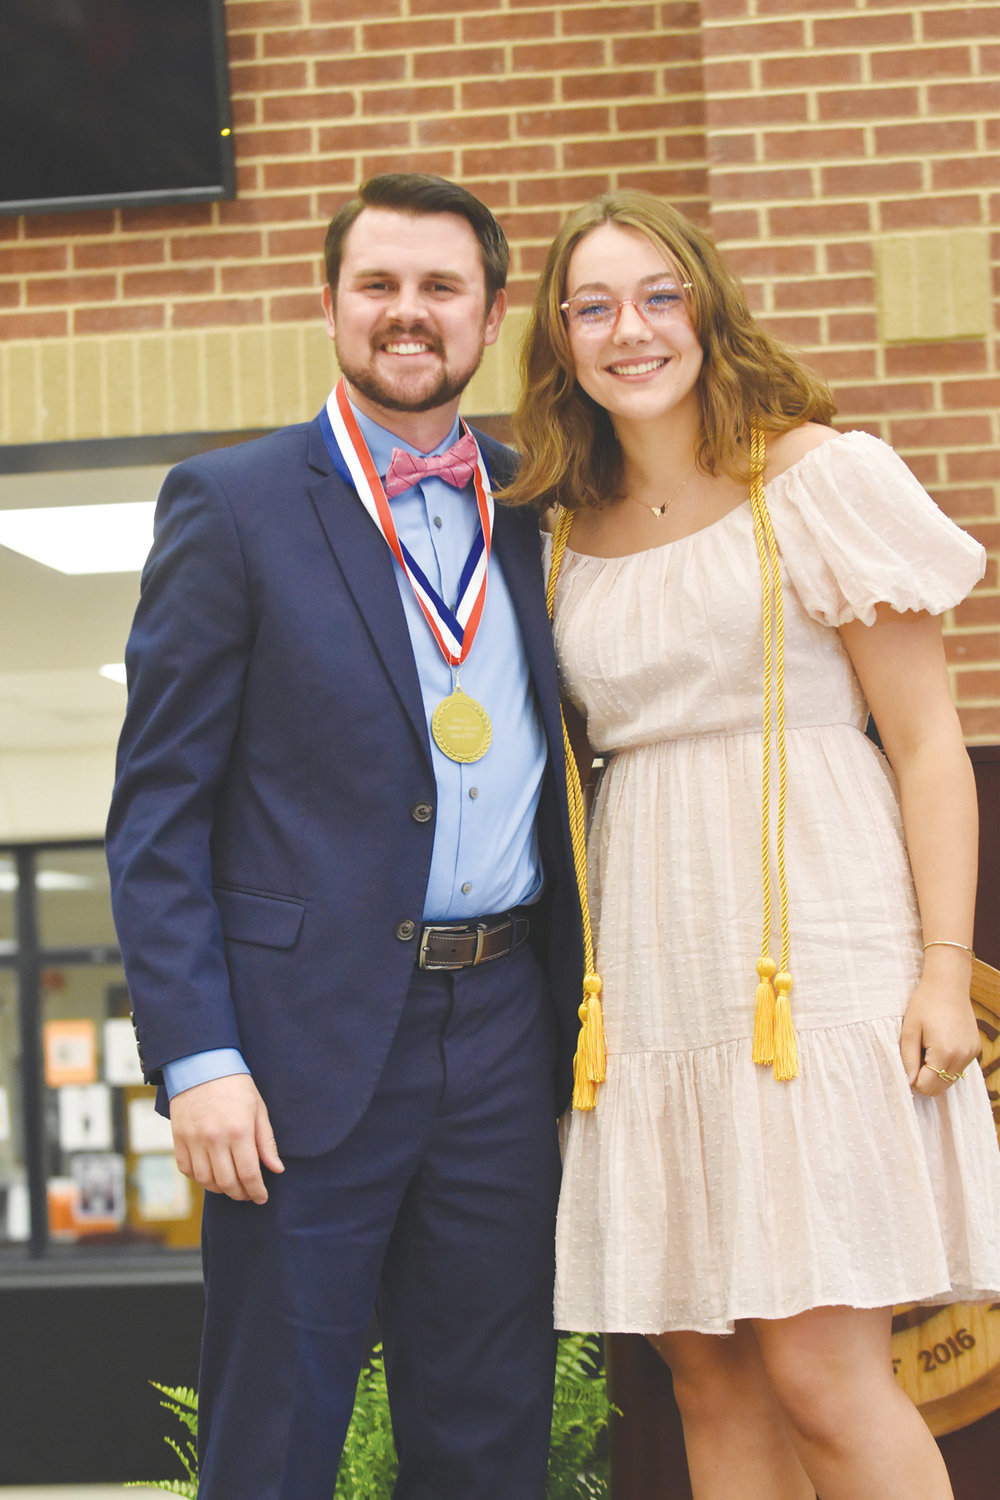 Elizabeth Clements is the daughter of Mr. and Mrs. Clements. Elizabeth plans to attend Mississippi State University in the fall. Elizabeth honored Mr. Dexx Moore.